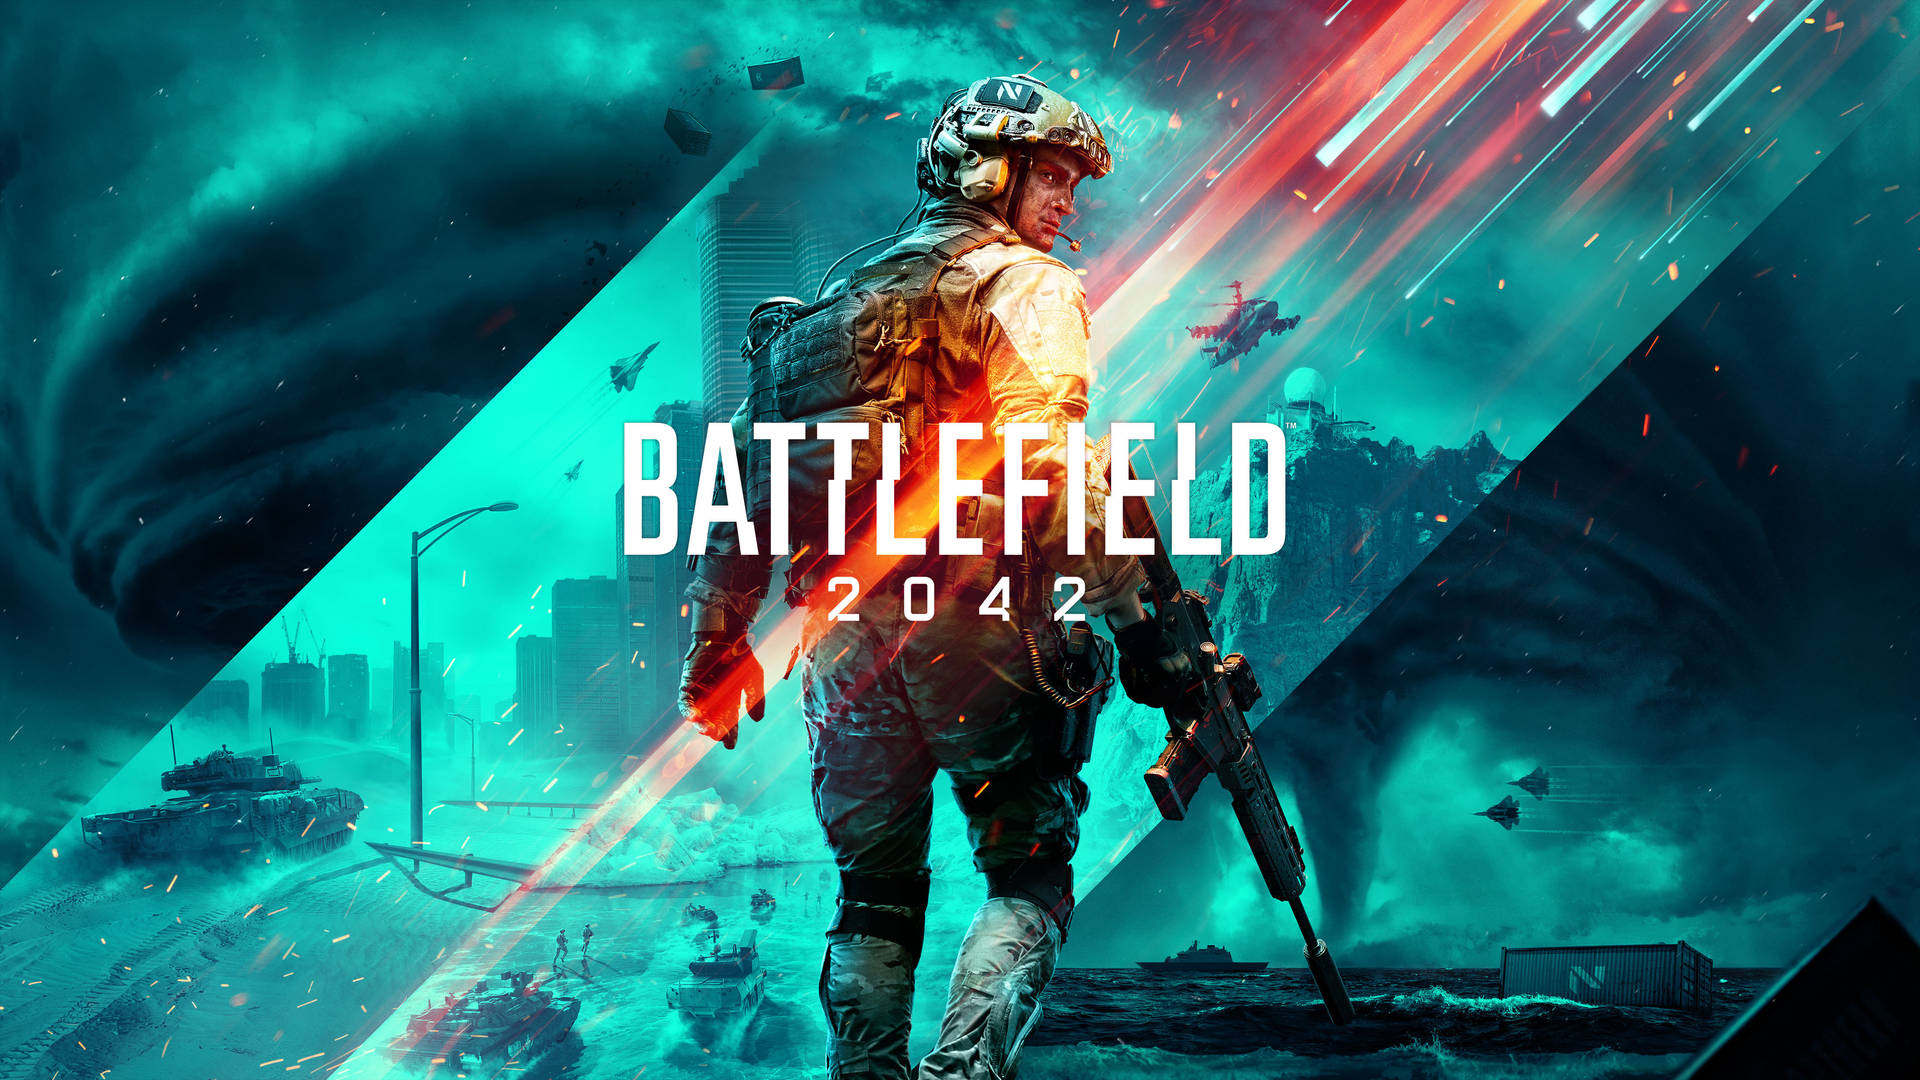 Battlefield V Definitive Edition Available Now